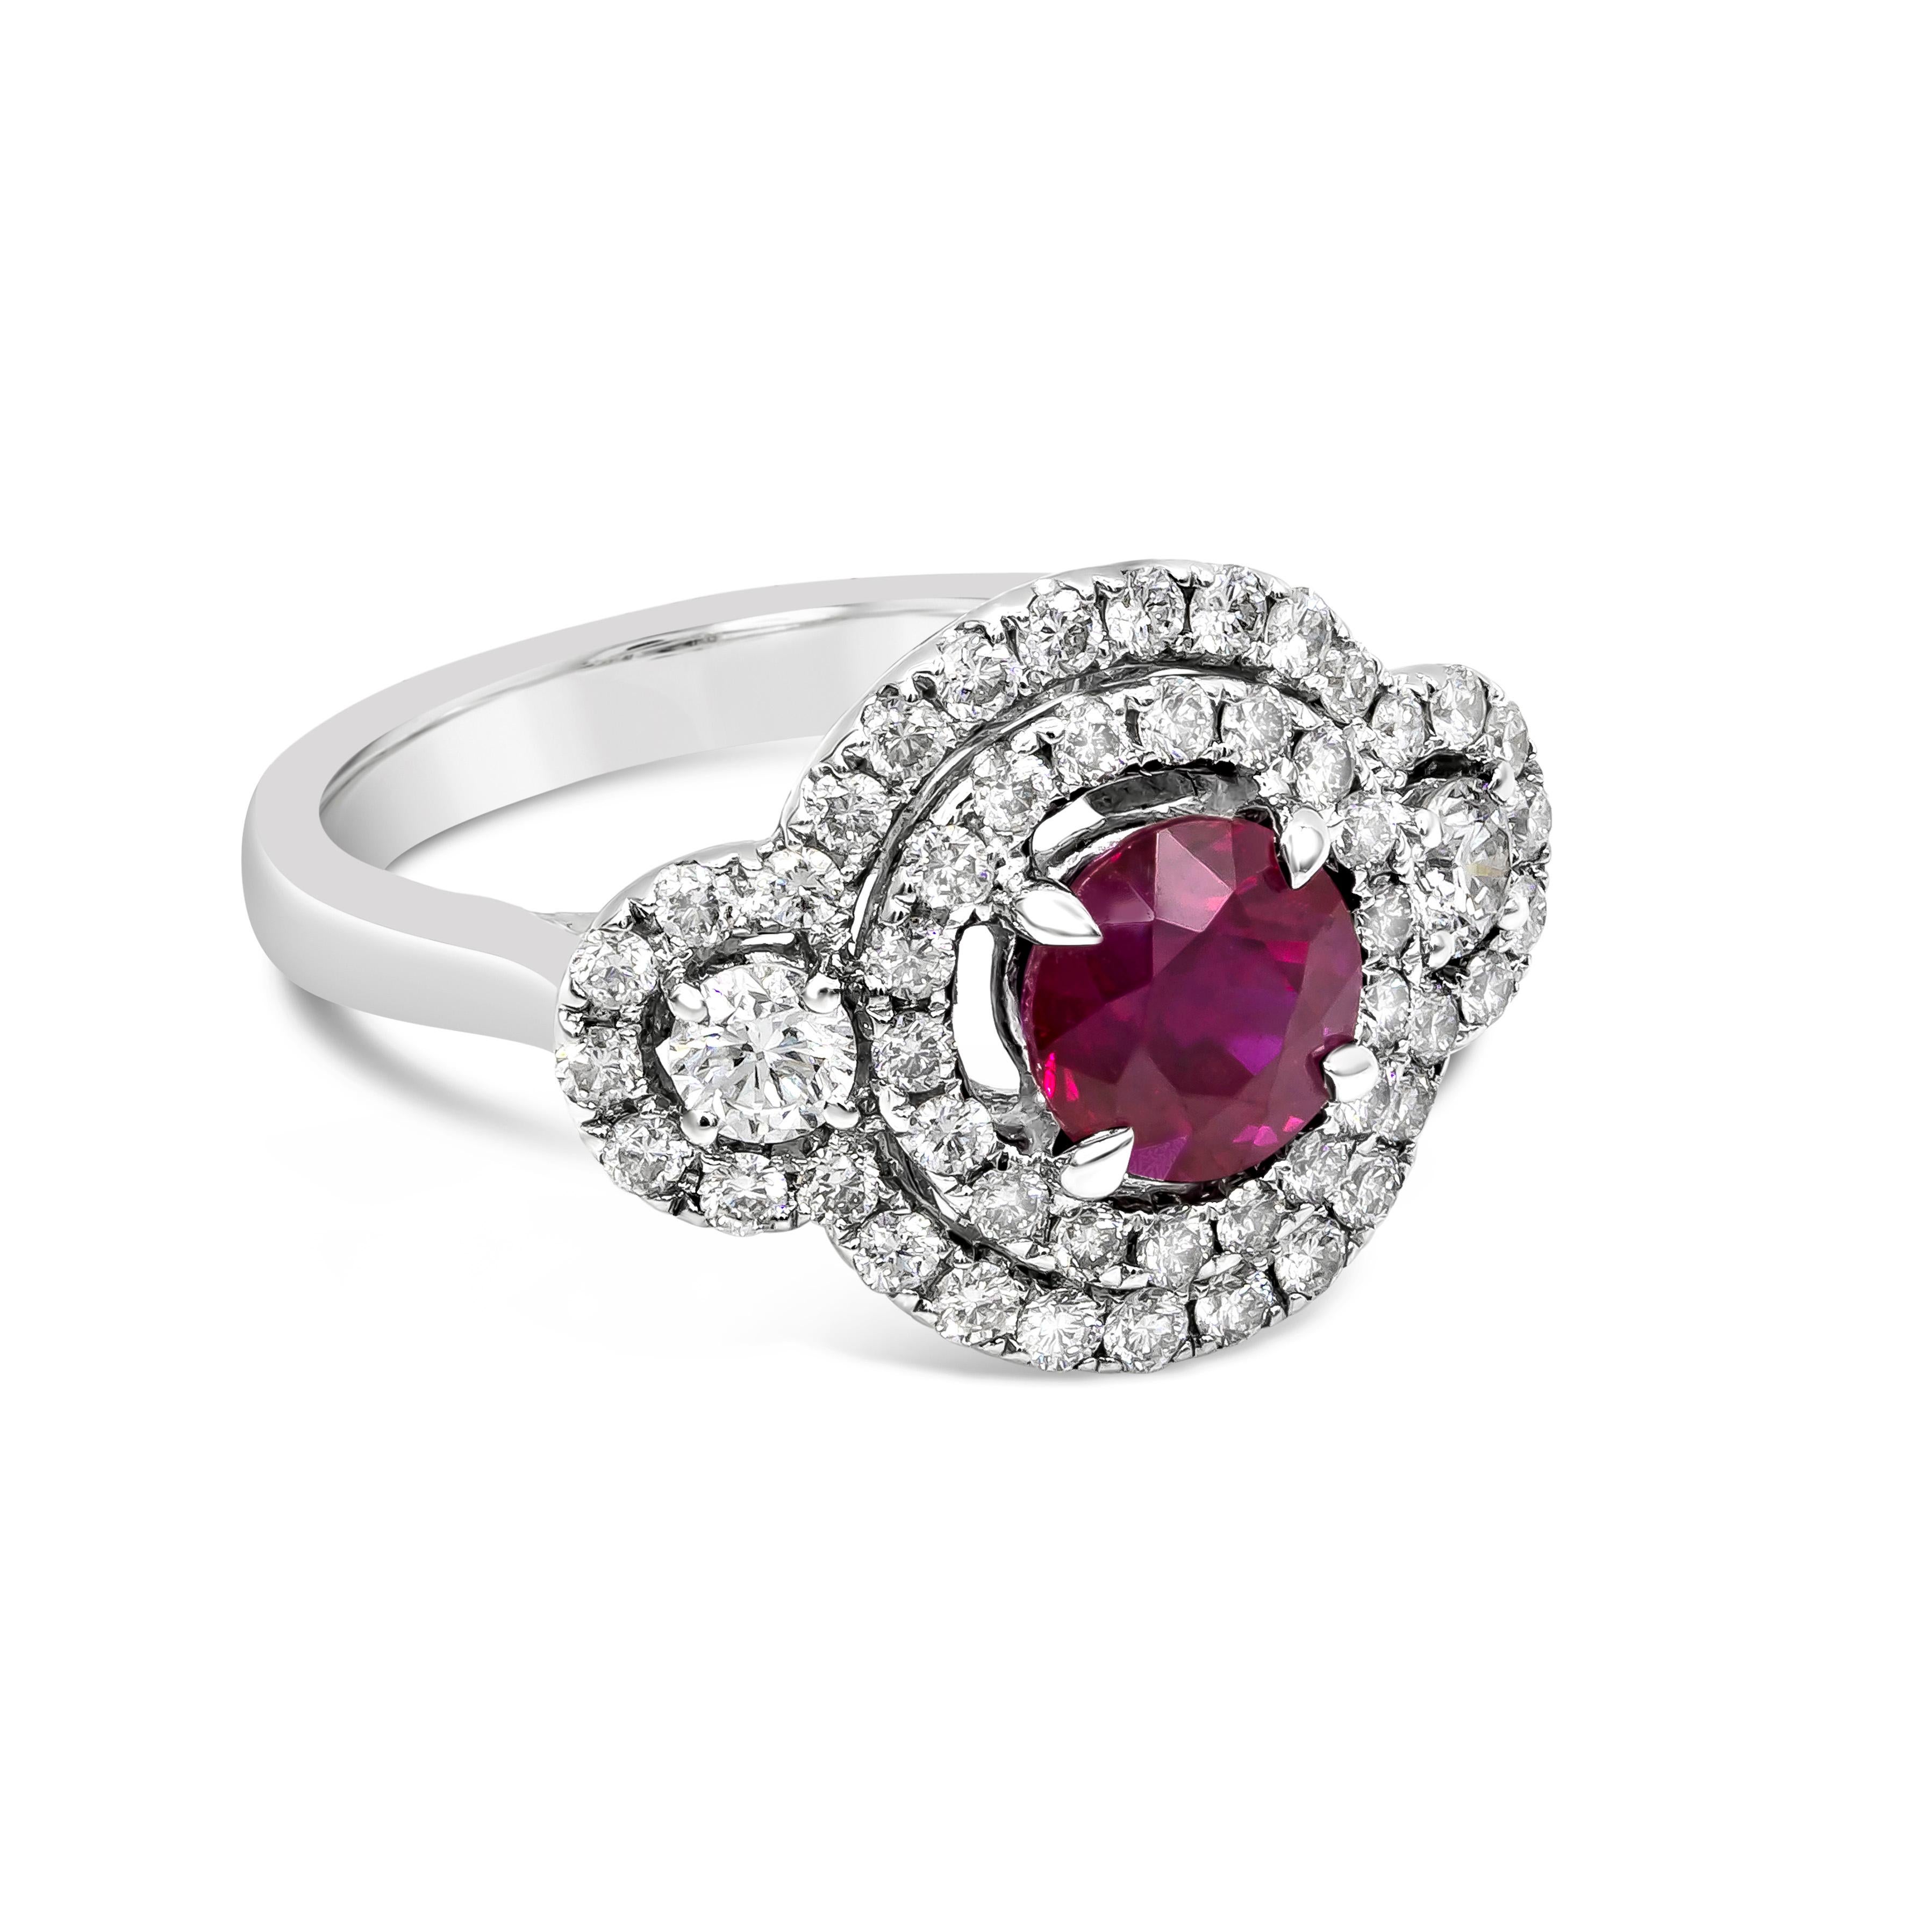 A stylish engagement ring showcasing a Burmese Origin GIA Certified 1.65 carat color-rich ruby, surrounded by two rows of round brilliant diamonds. Flanked on each side by a round brilliant diamond. Diamonds weigh 1.62 carats total. Made with 18K